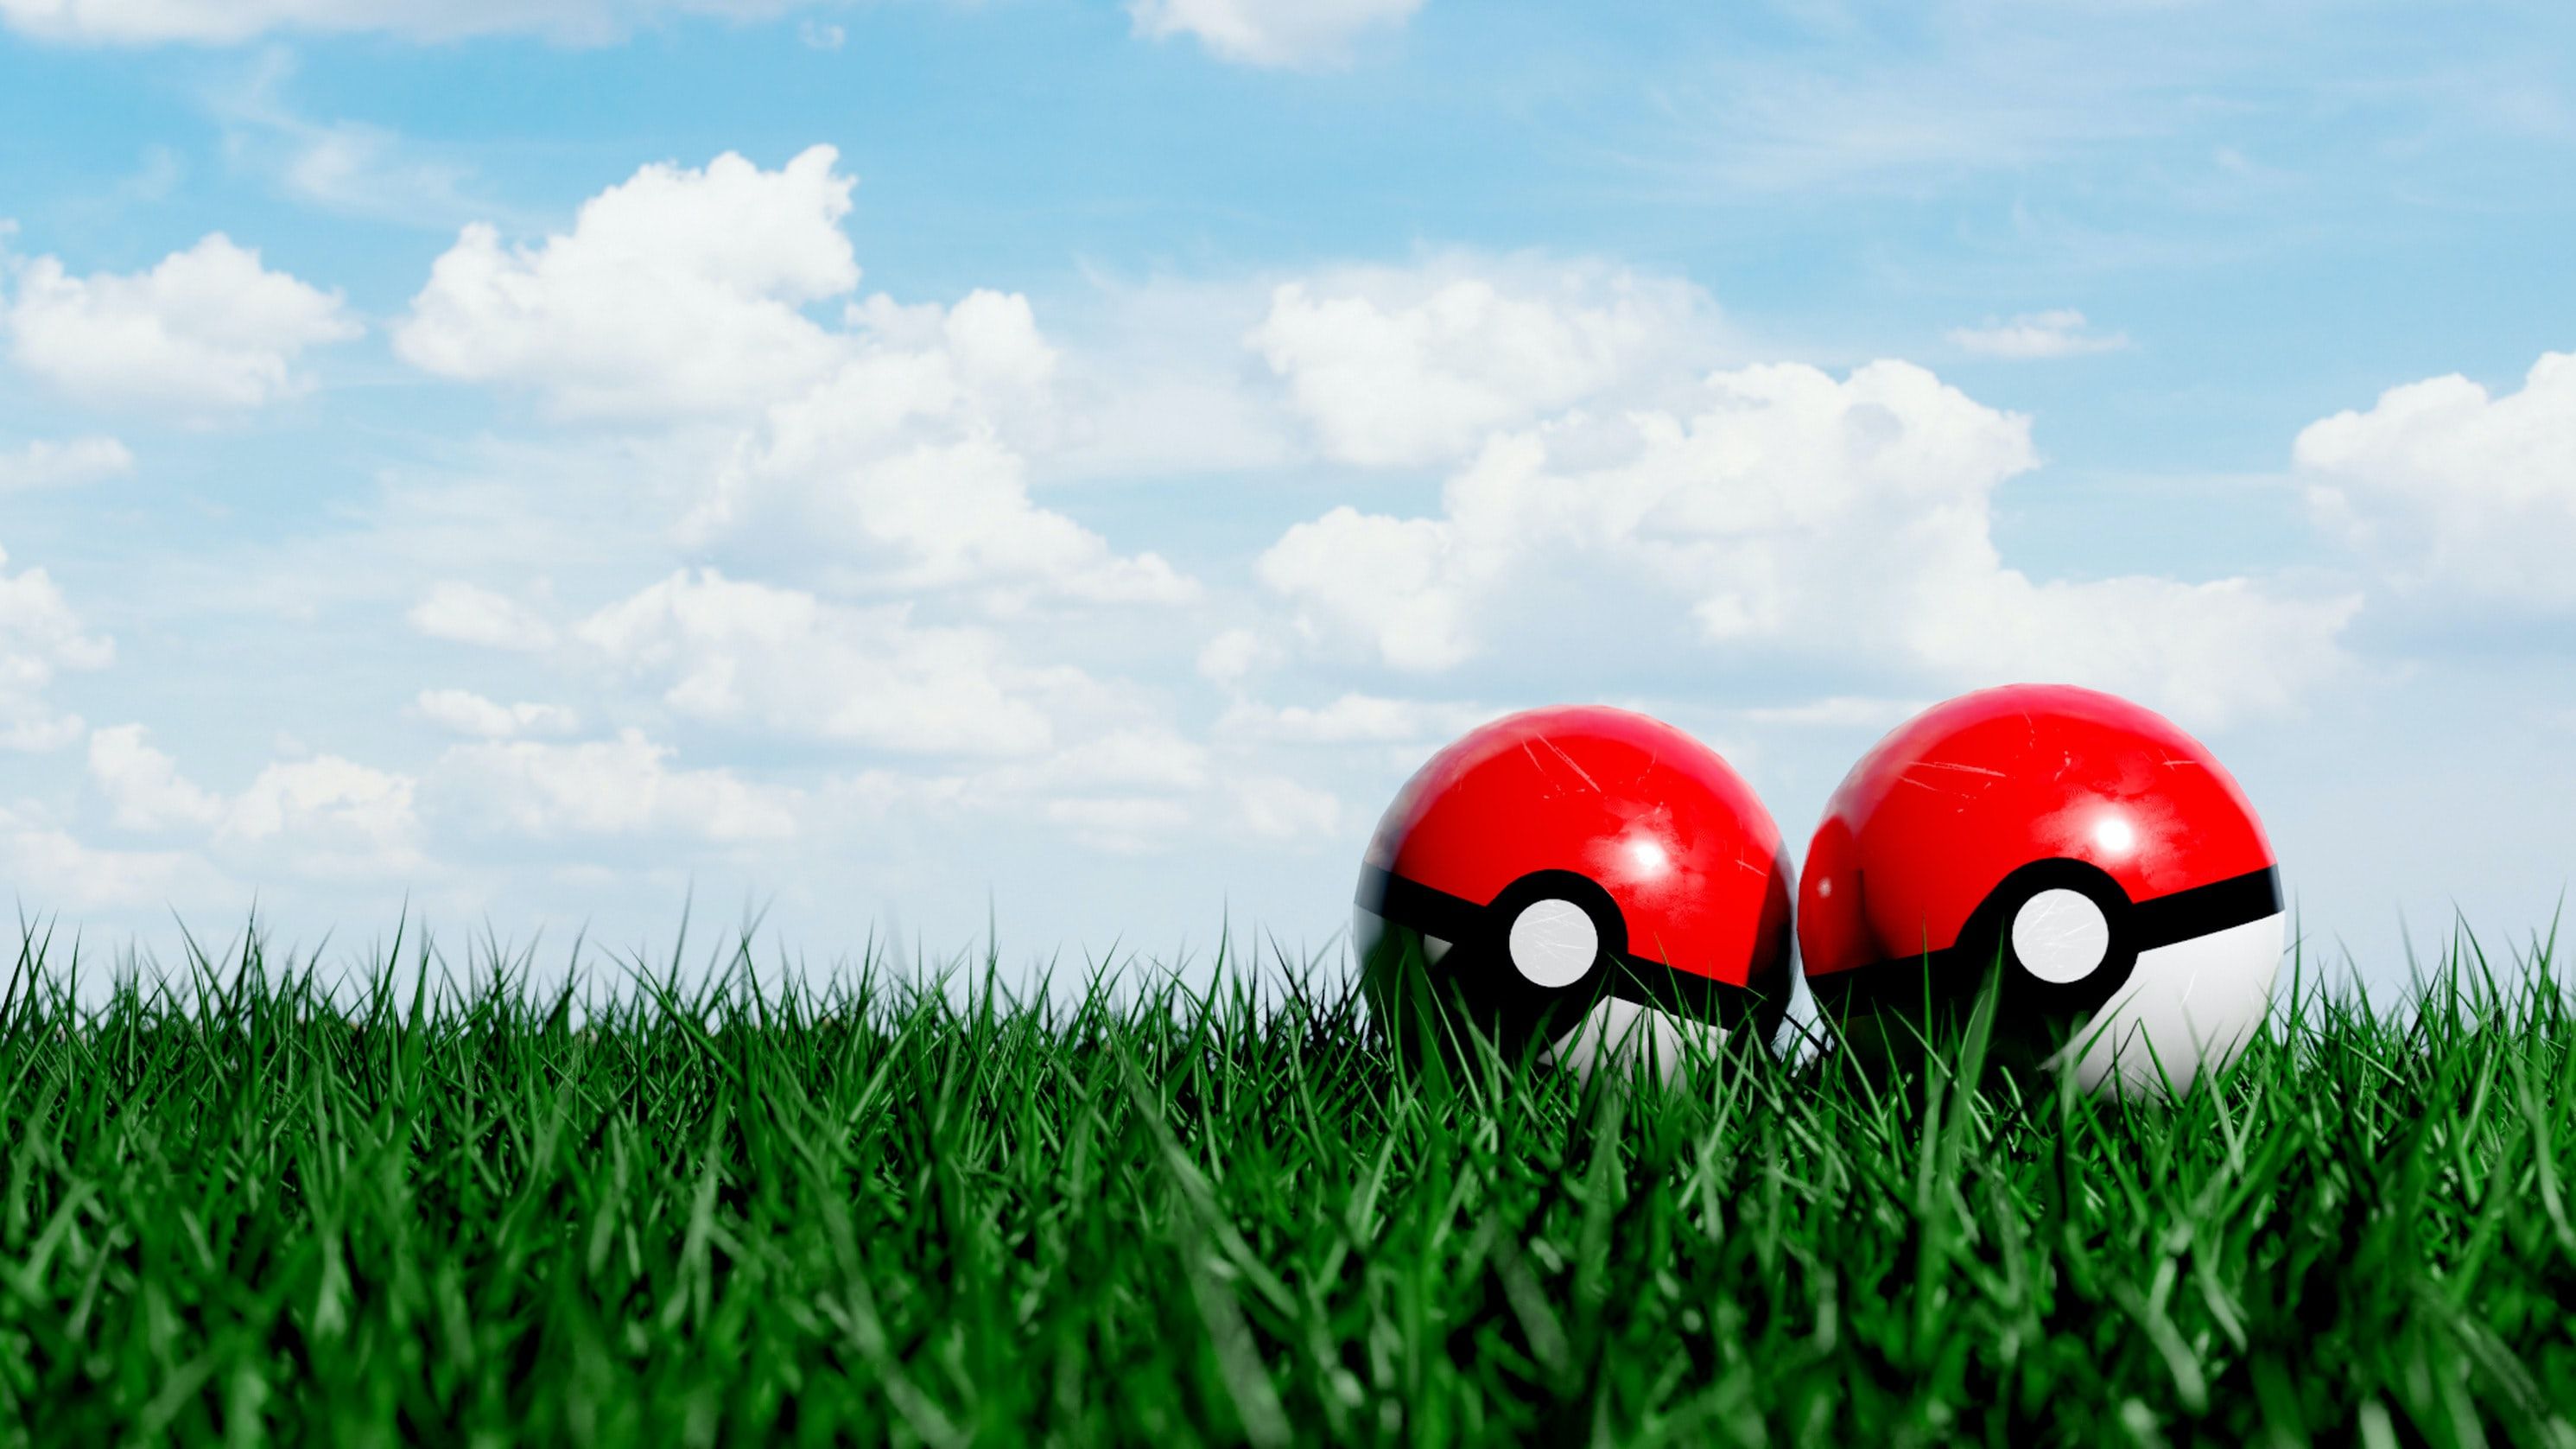 Two Poke Balls on the grass